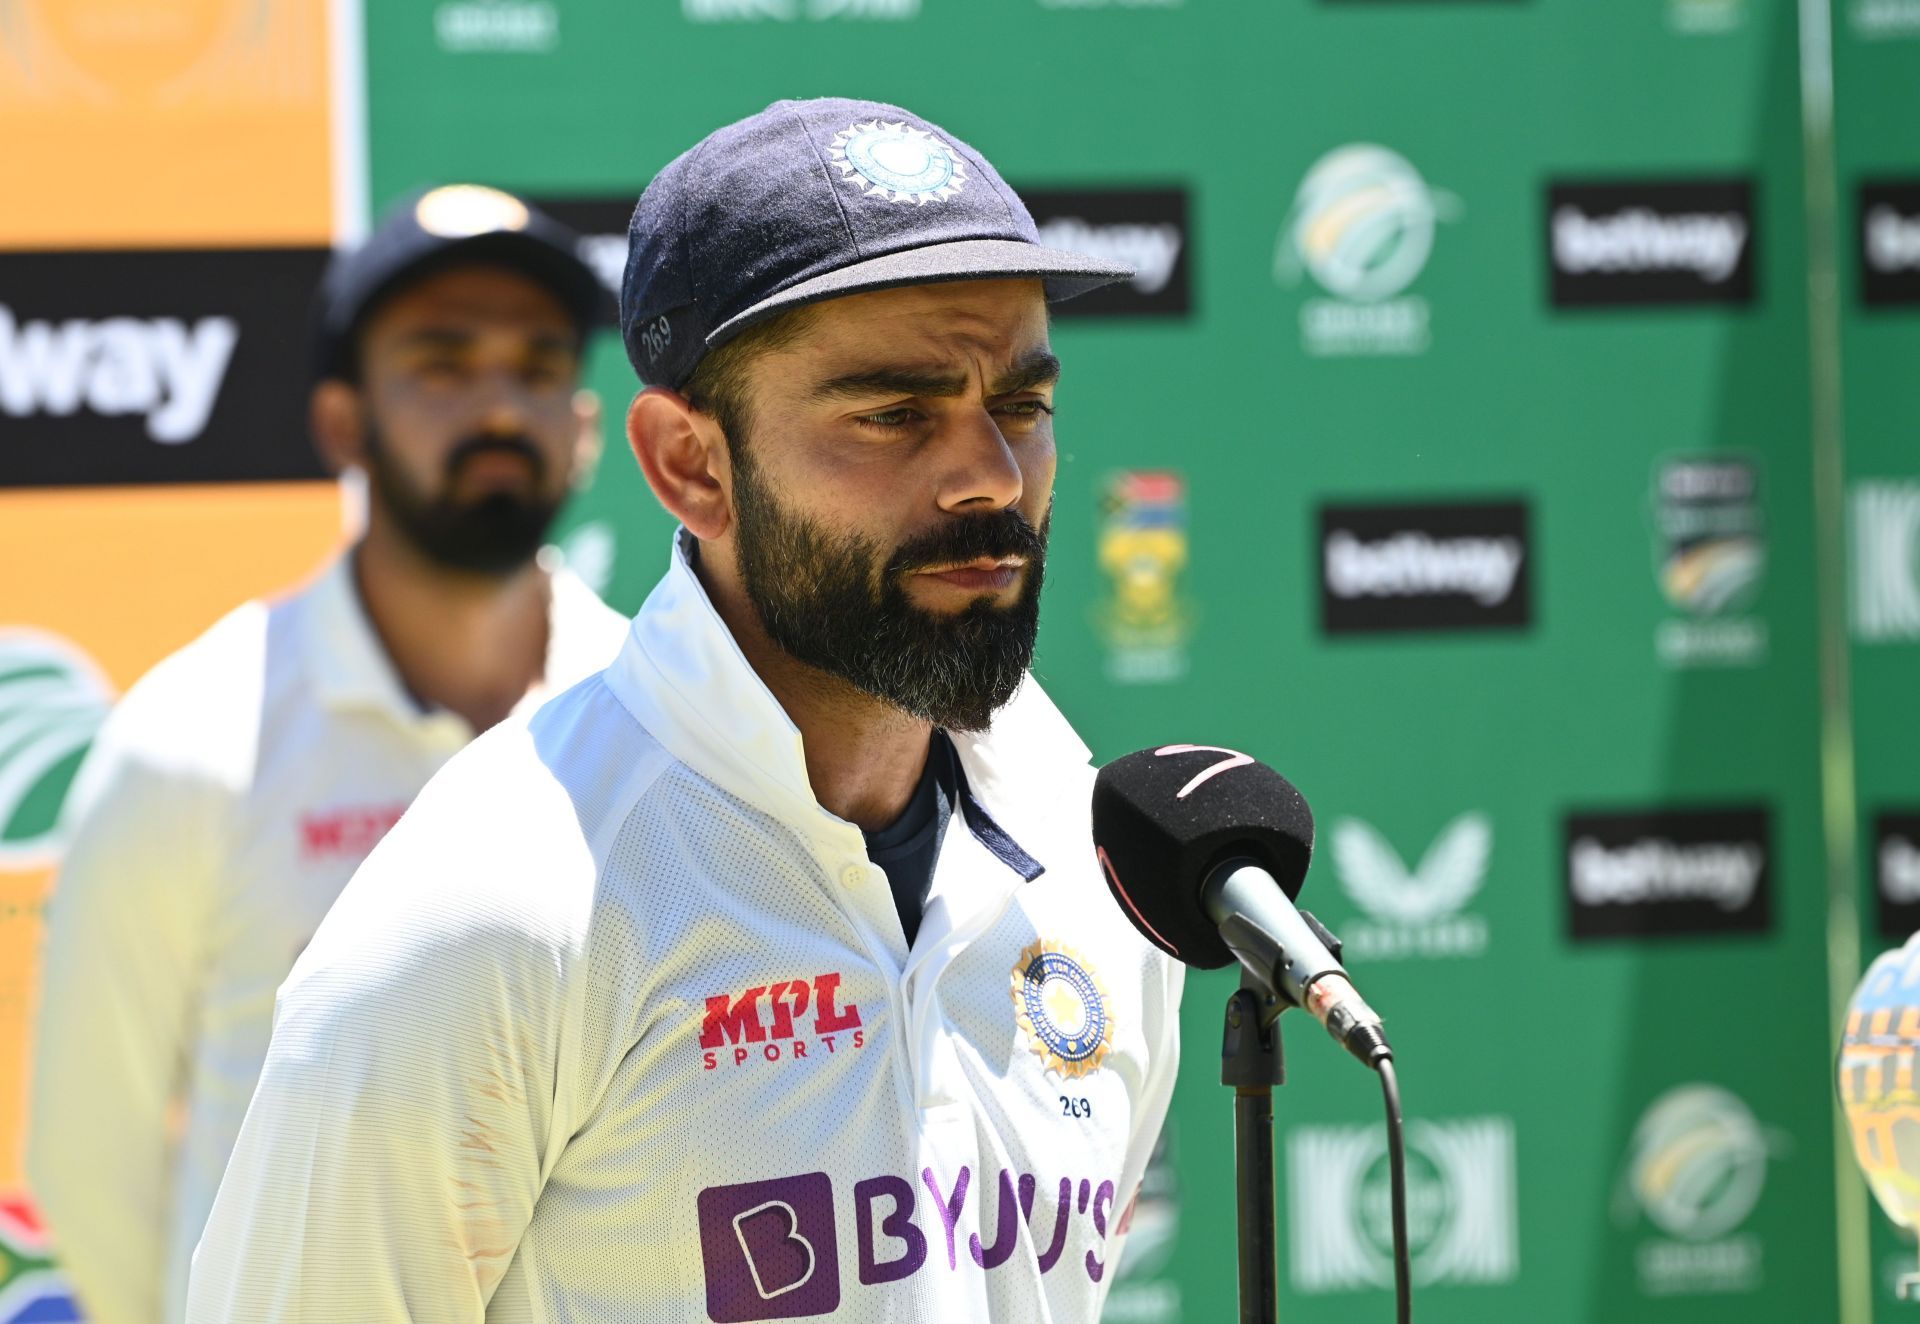 Kohli stepped down as Test captain after the Test series against South Africa